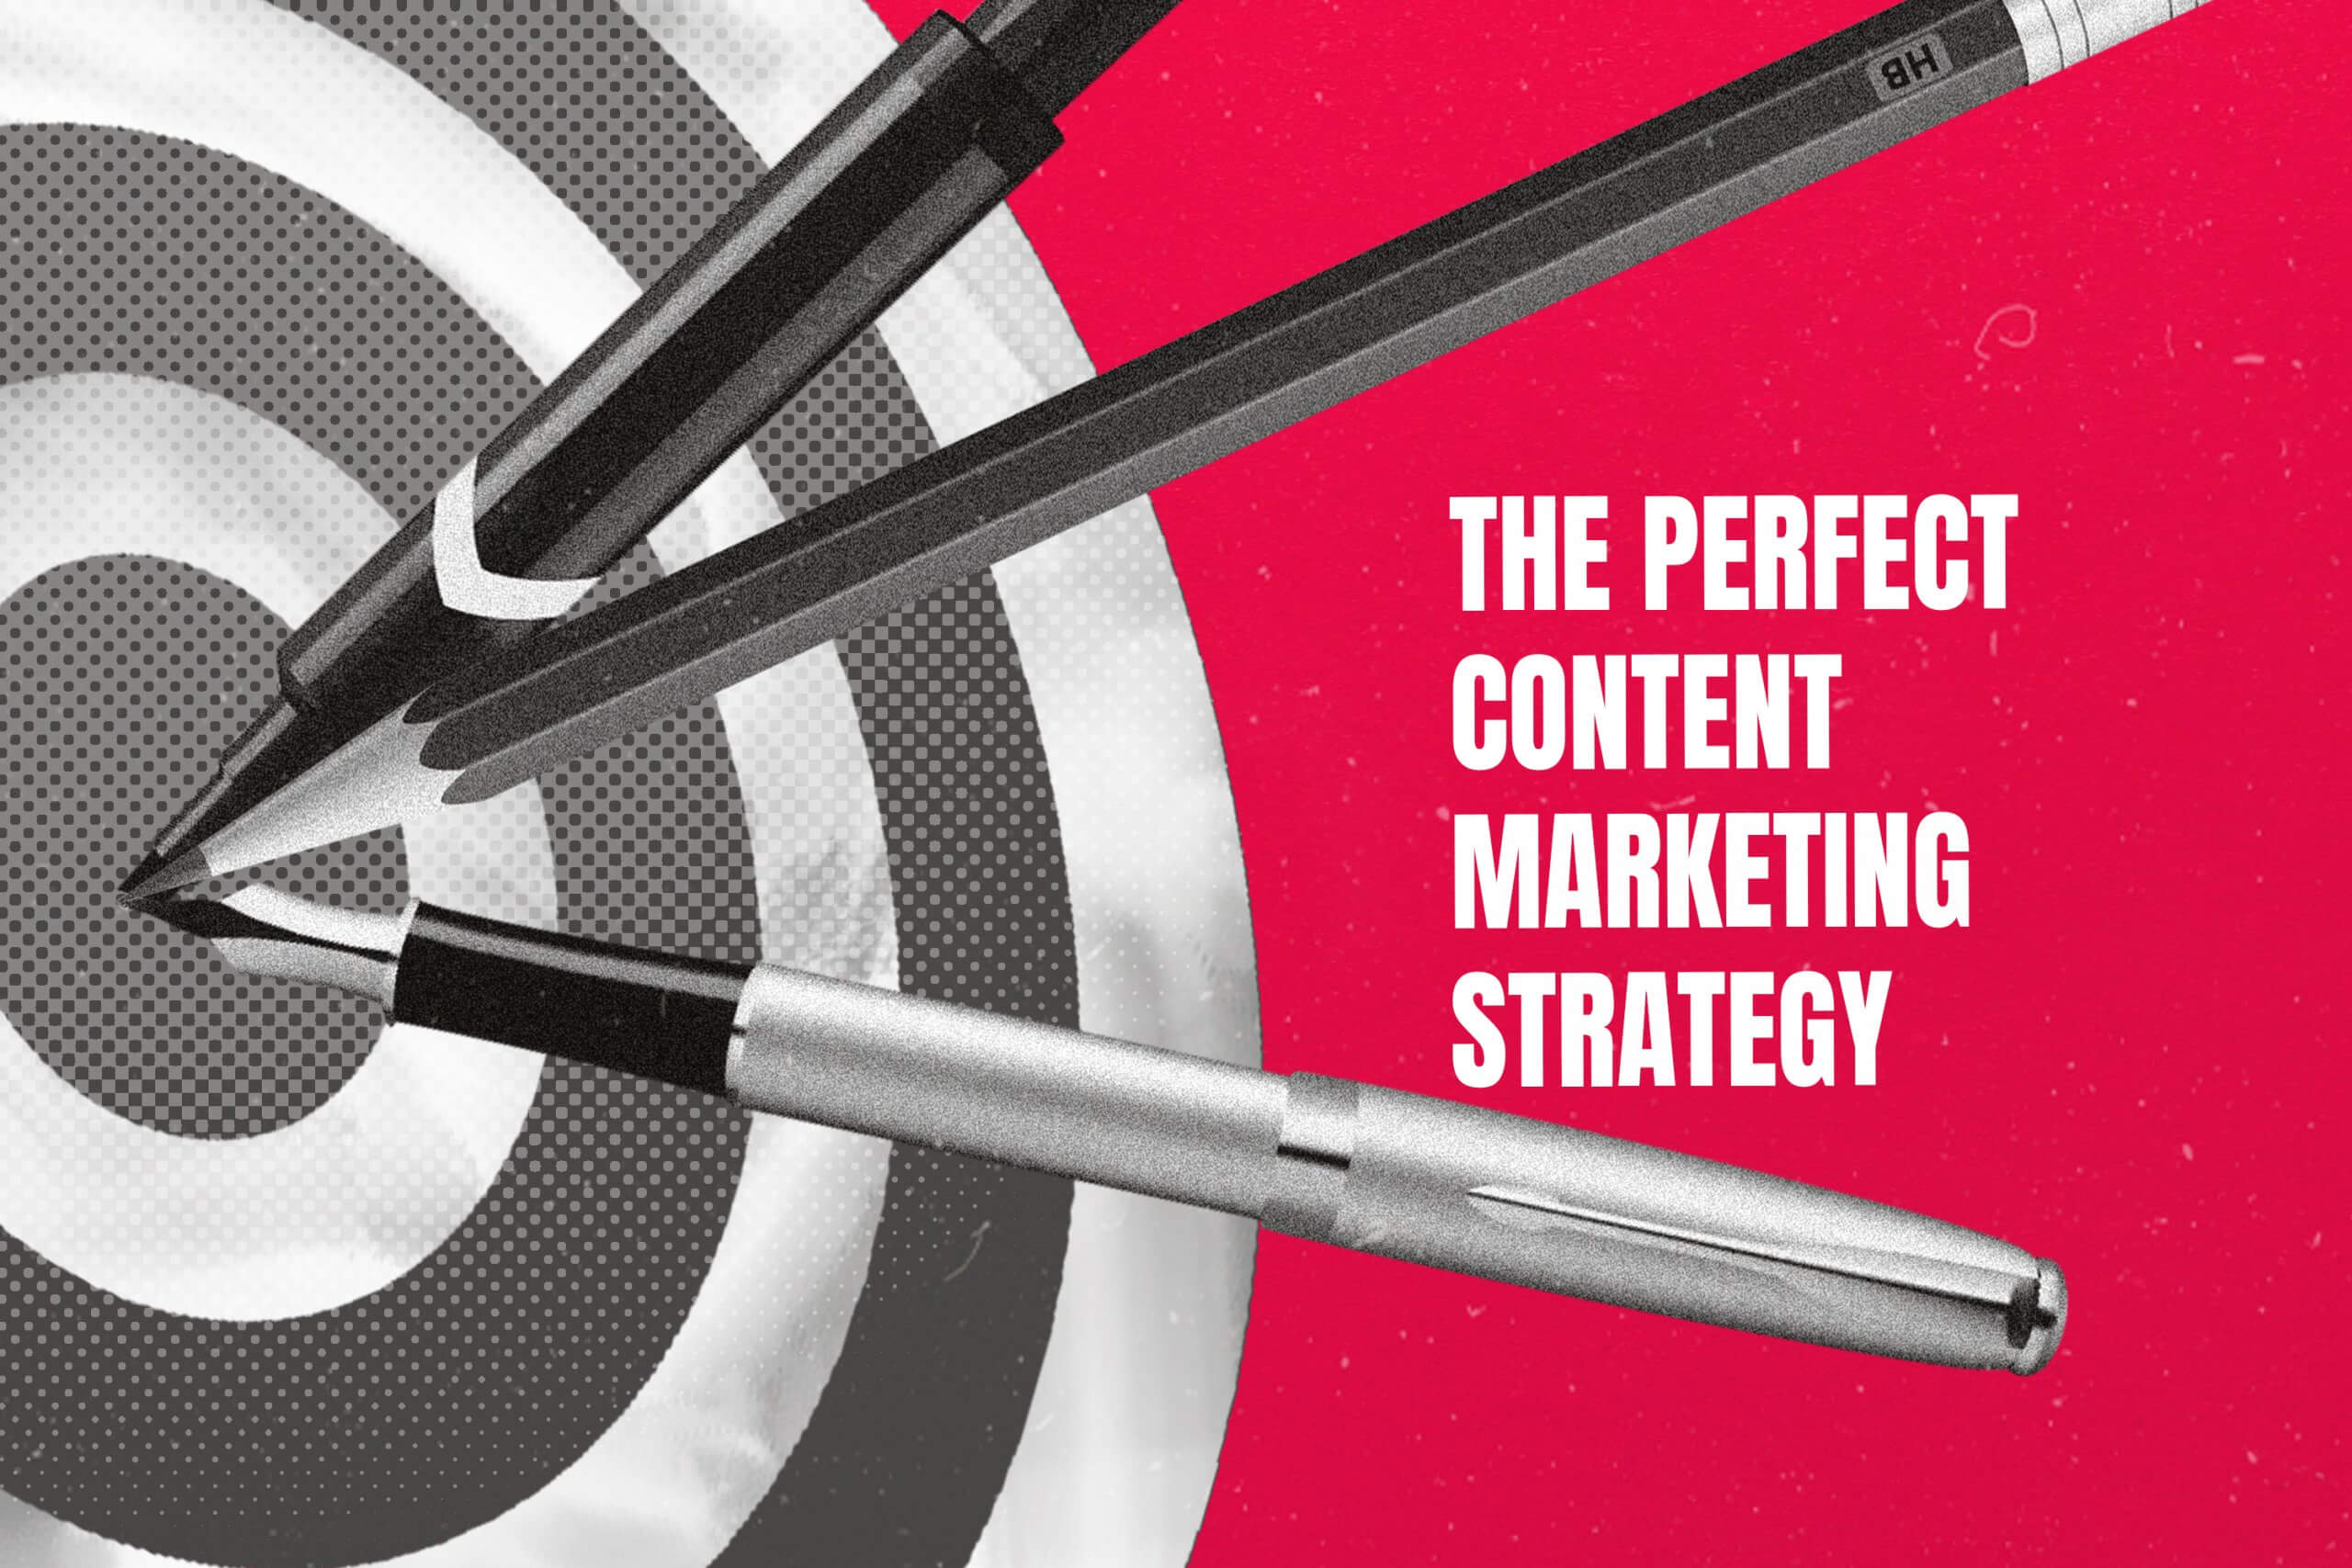 4 Simple Steps to Run an Effective Content Marketing Campaign